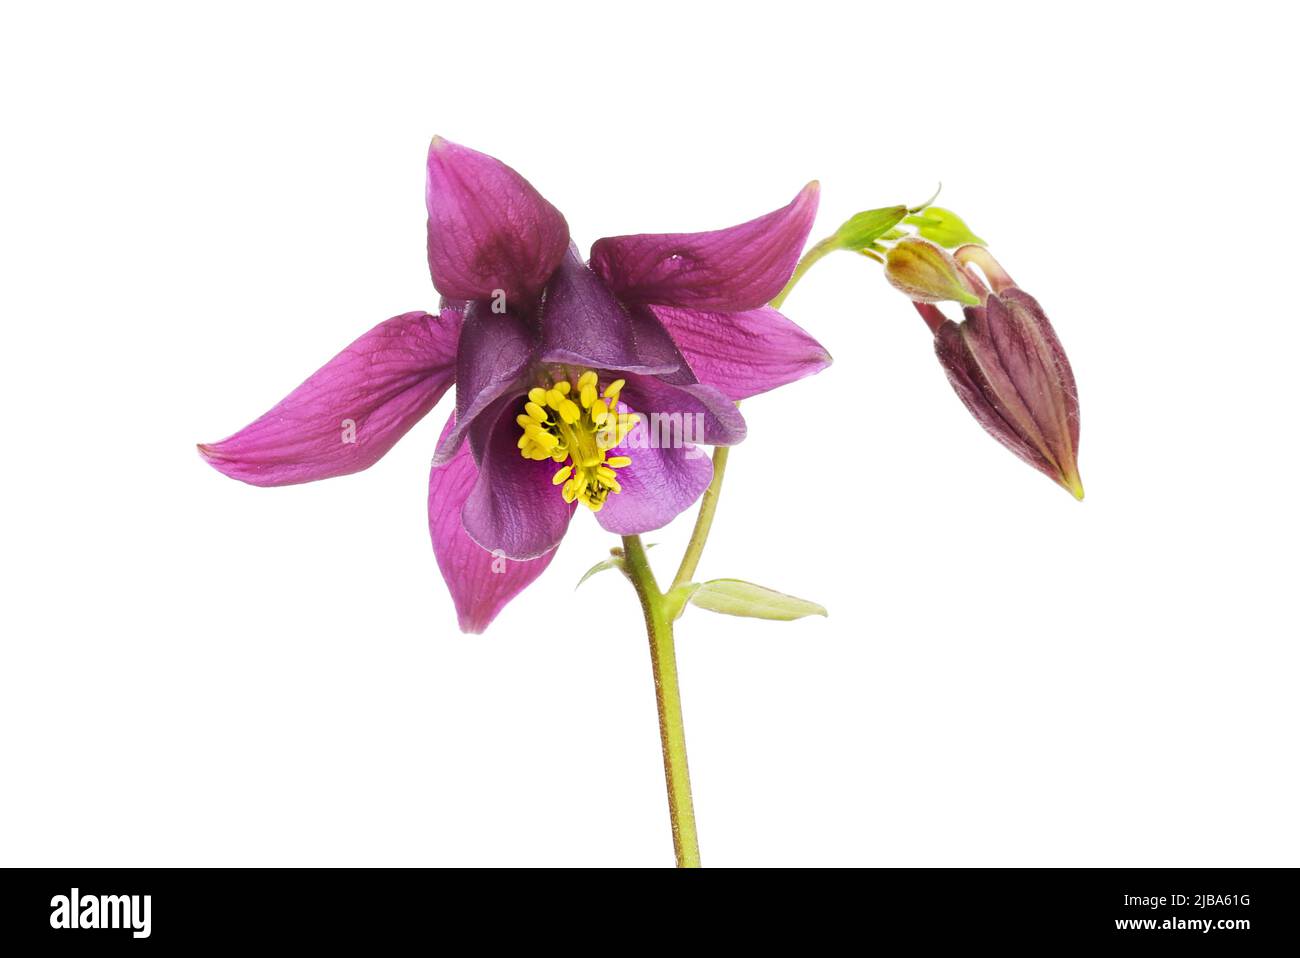 Aquilegia flower and bud isolated against white Stock Photo